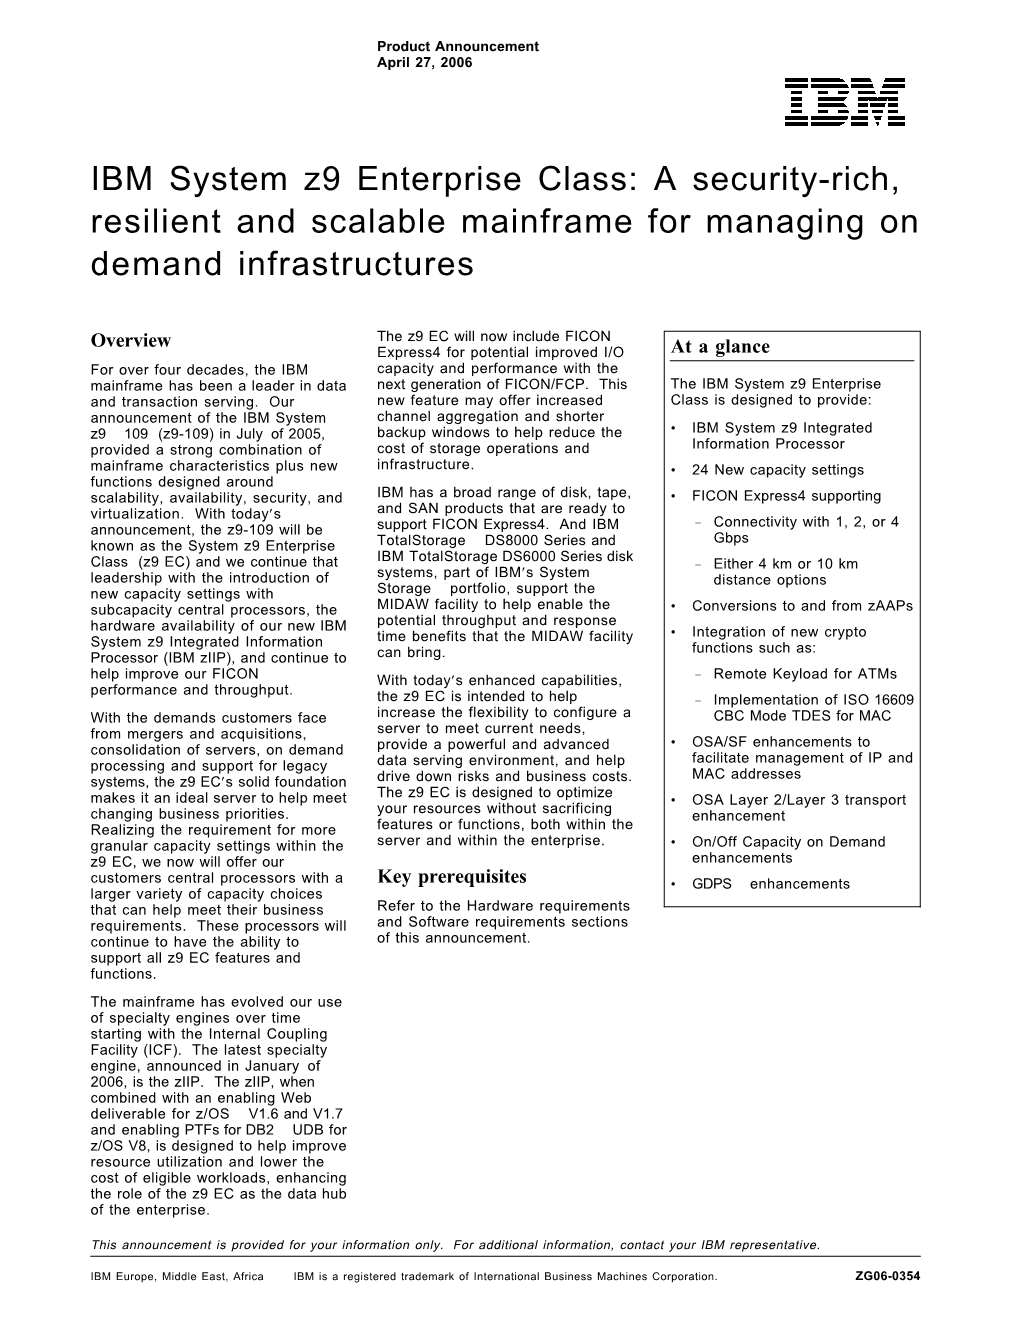 IBM System Z9 Enterprise Class: a Security-Rich, Resilient and Scalable Mainframe for Managing on Demand Infrastructures